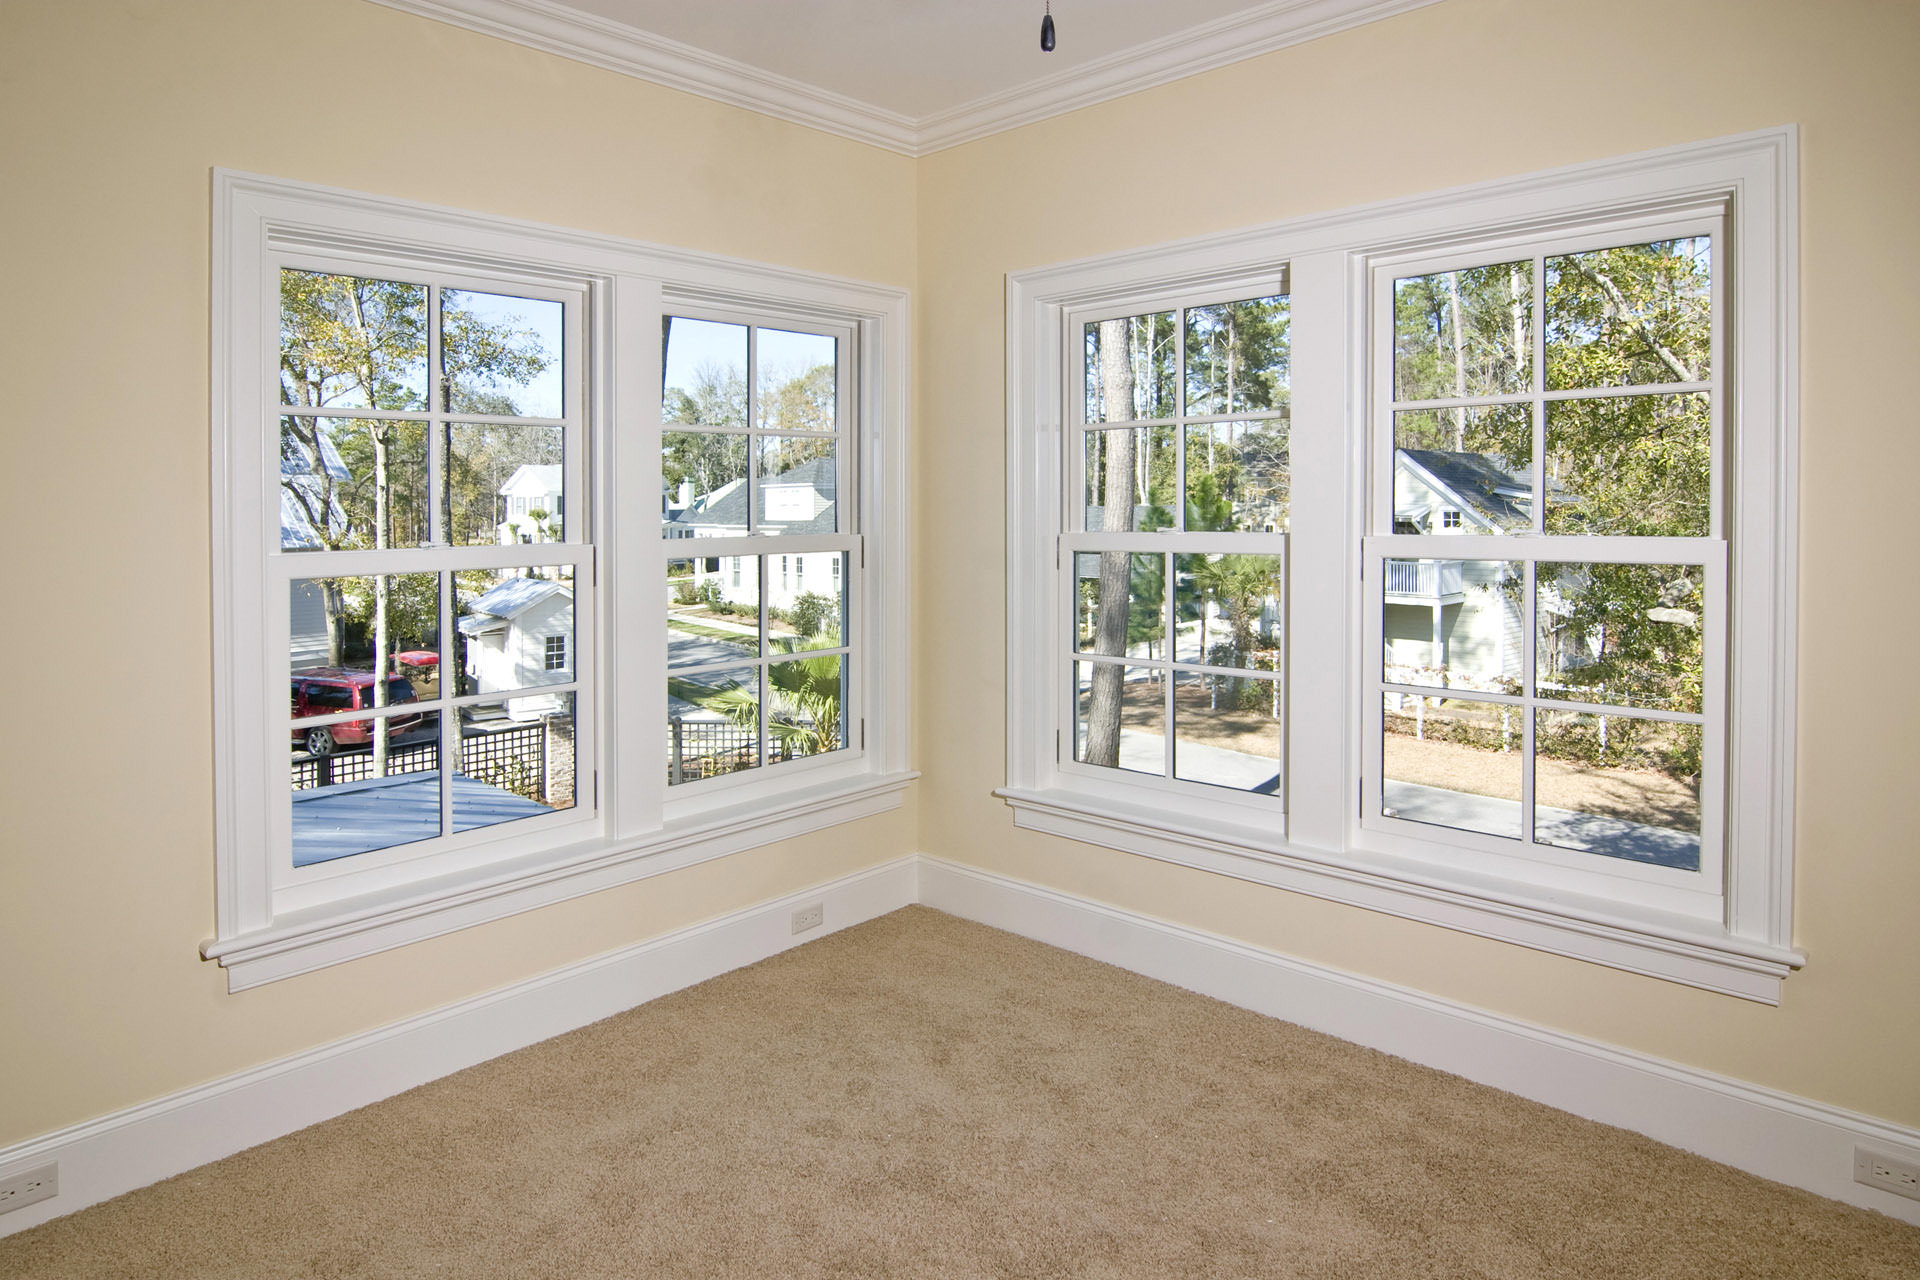 Double or Triple Glazing, which is better?